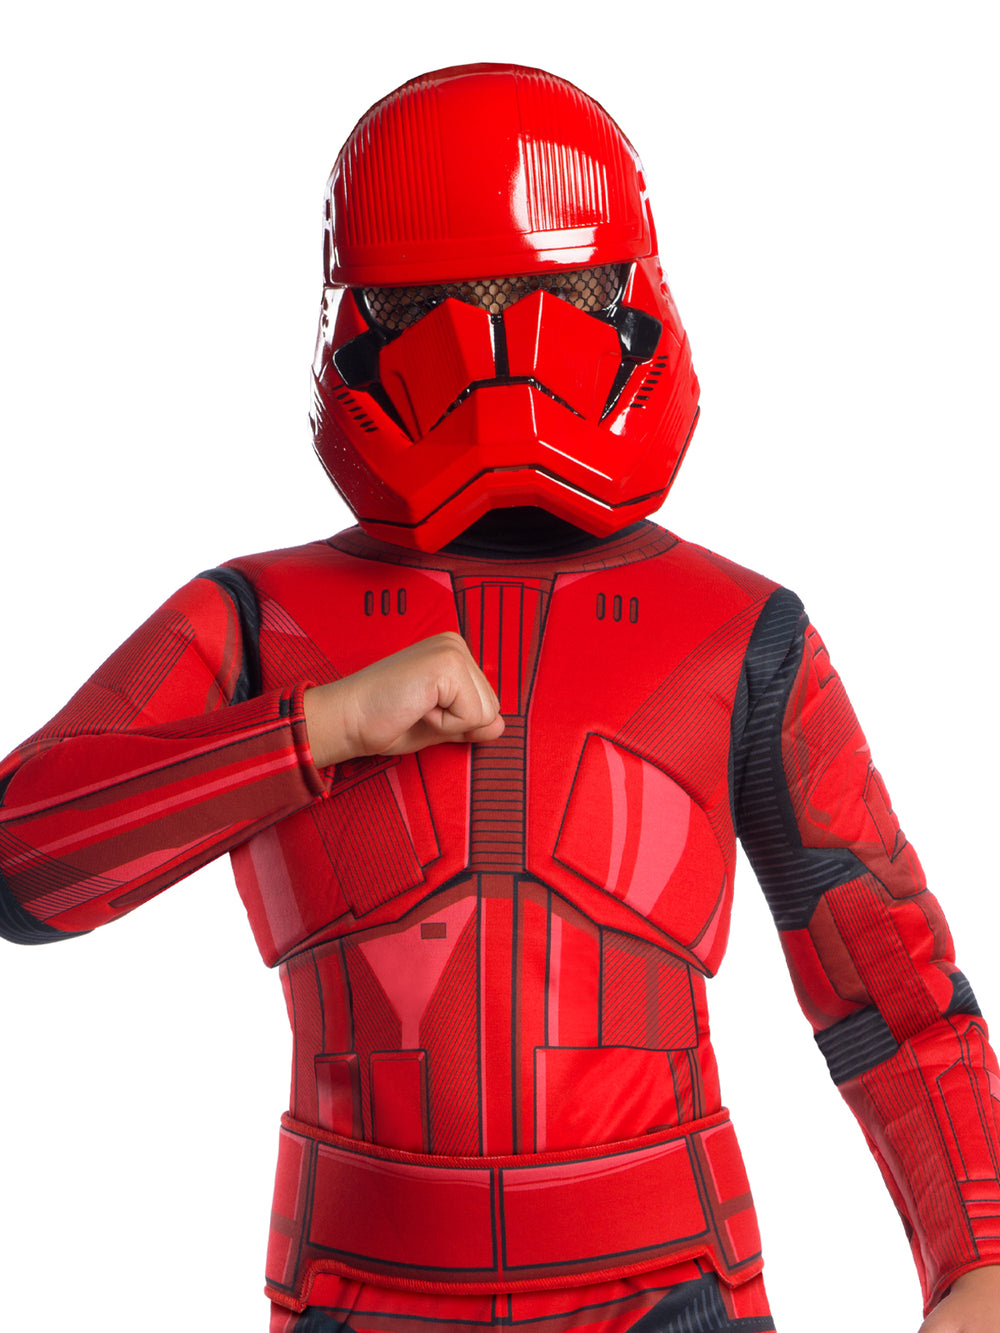 SITH TROOPER DELUXE COSTUME, CHILD - Little Shop of Horrors